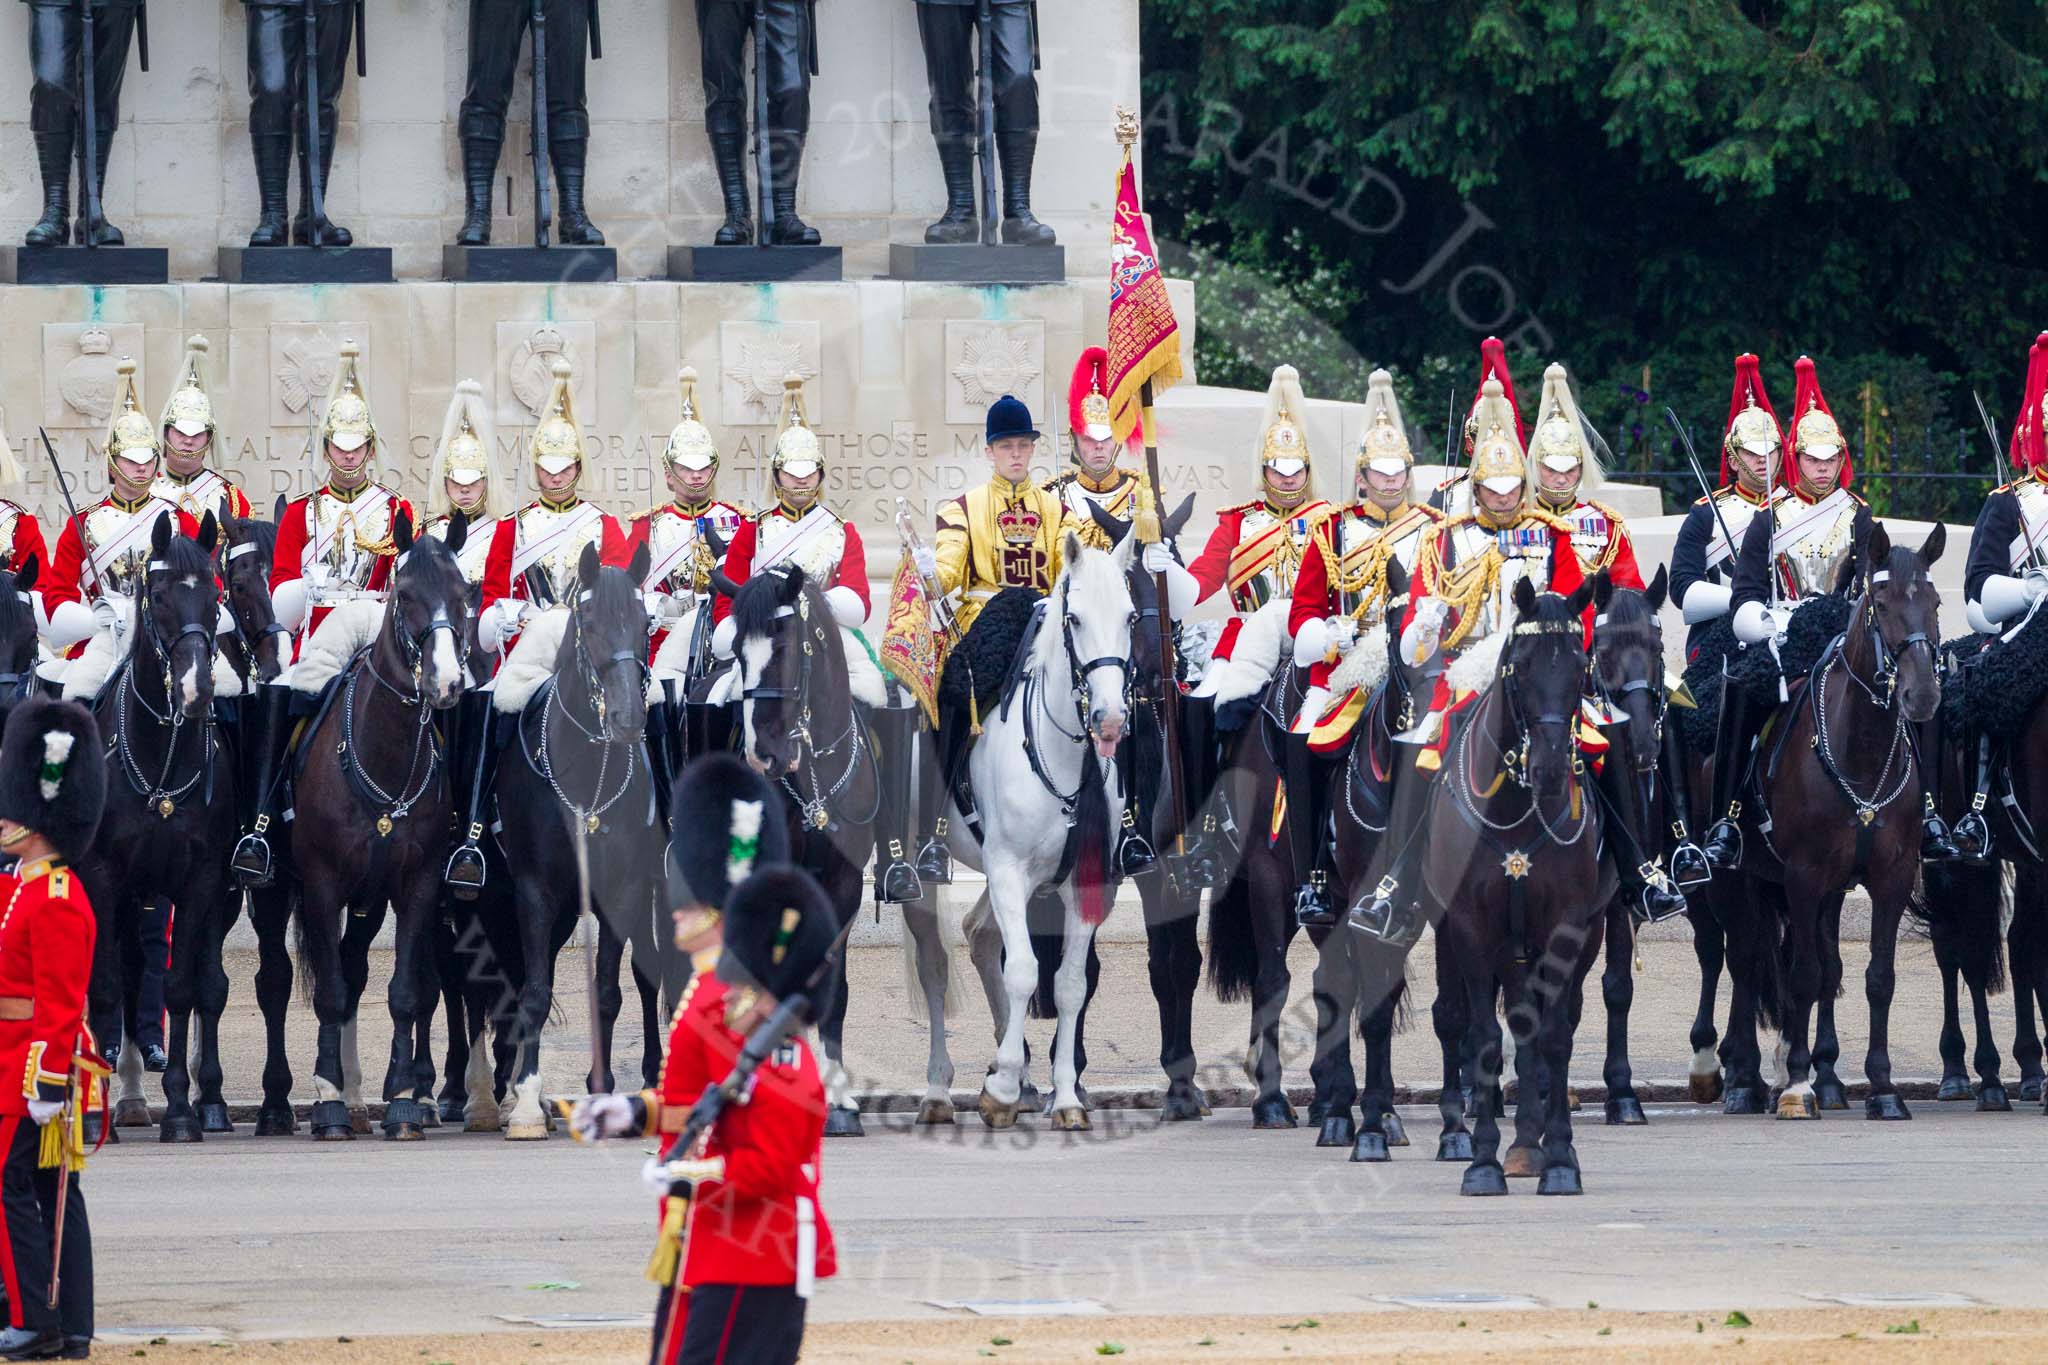 Trooping the Colour 2015. Image #421, 13 June 2015 11:30 Horse Guards Parade, London, UK